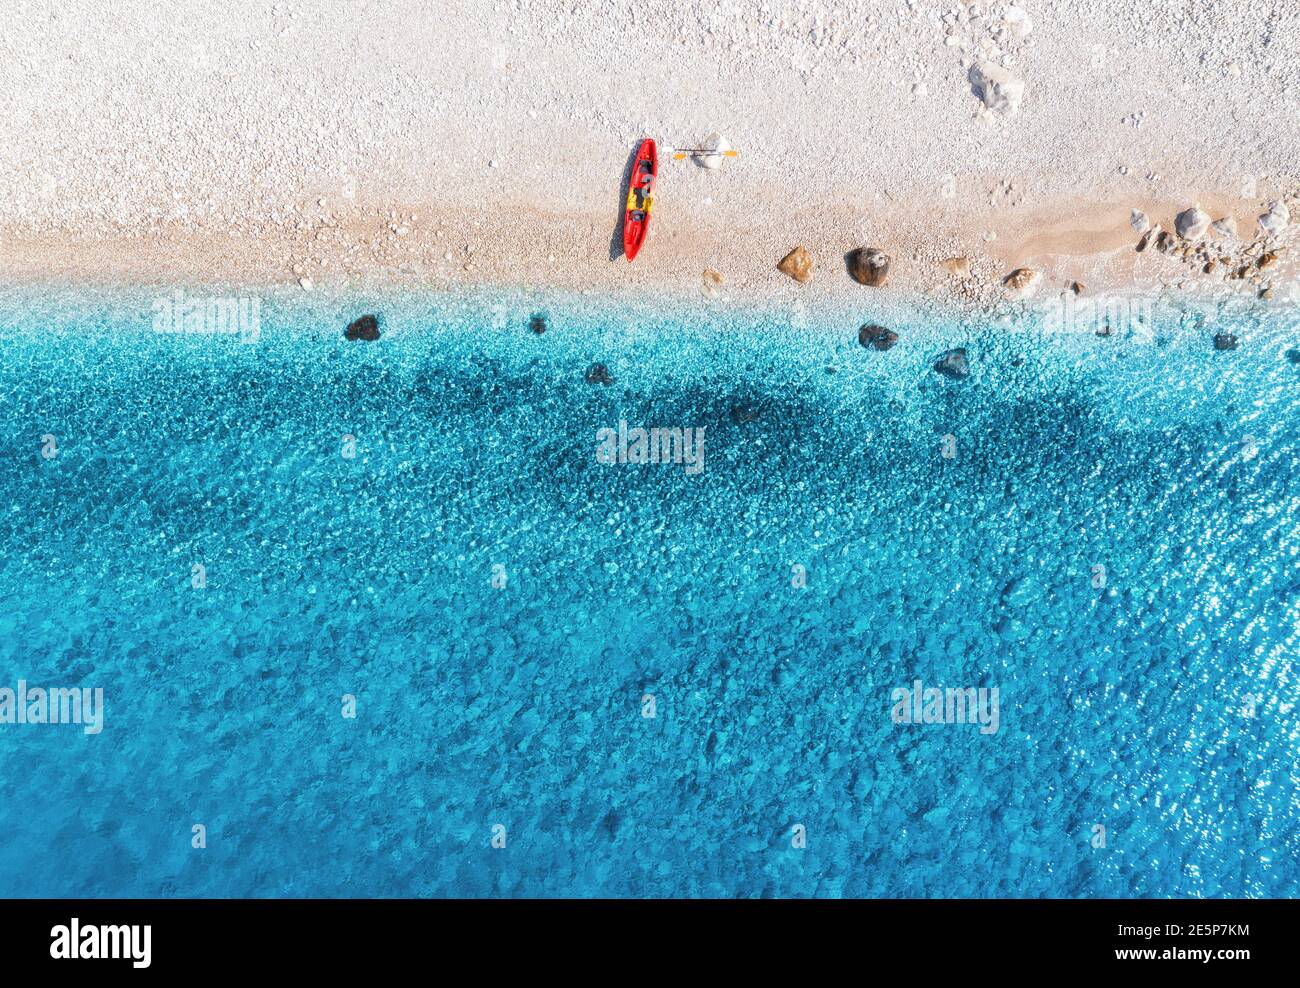 Aerial view of empty sandy beach with red canoe Stock Photo